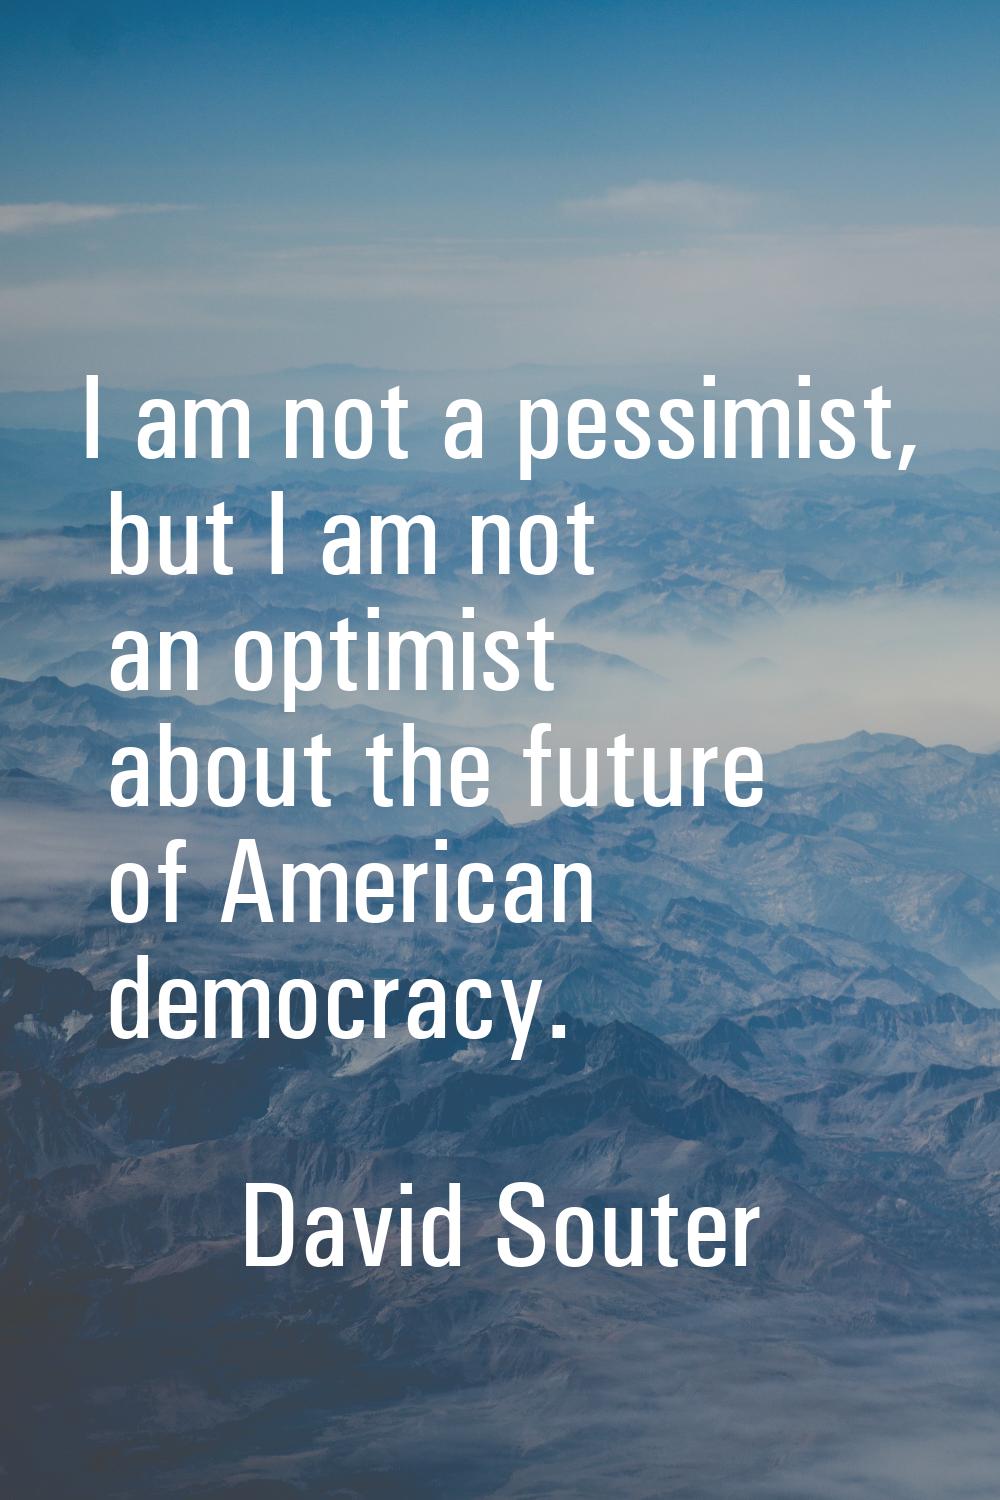 I am not a pessimist, but I am not an optimist about the future of American democracy.